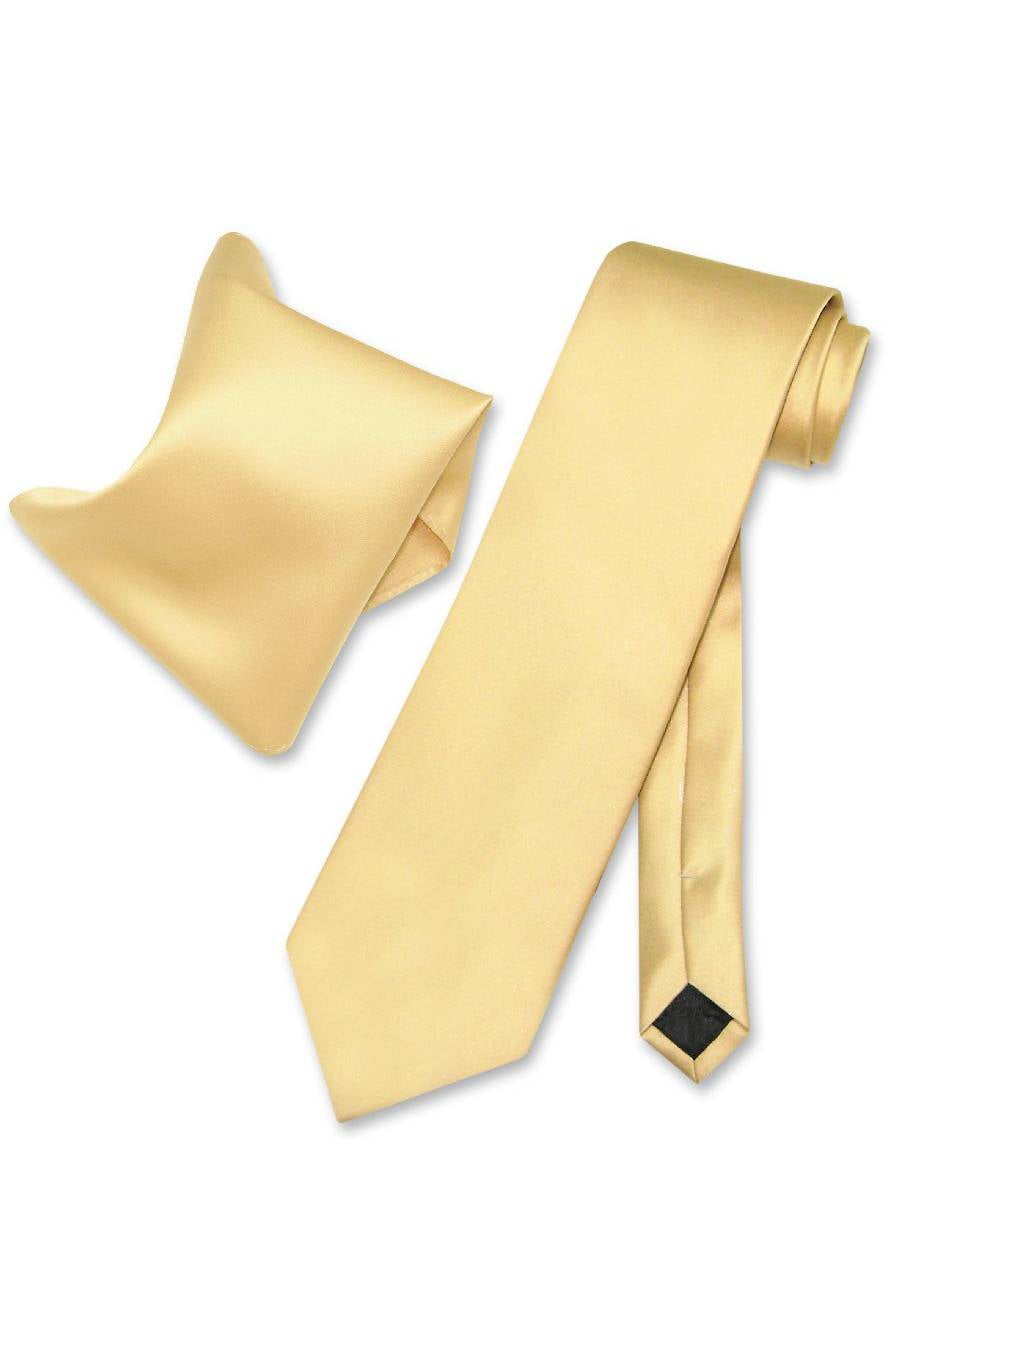 New Polyester Men's extra long Neck Tie & hankie set solid party wedding gold 